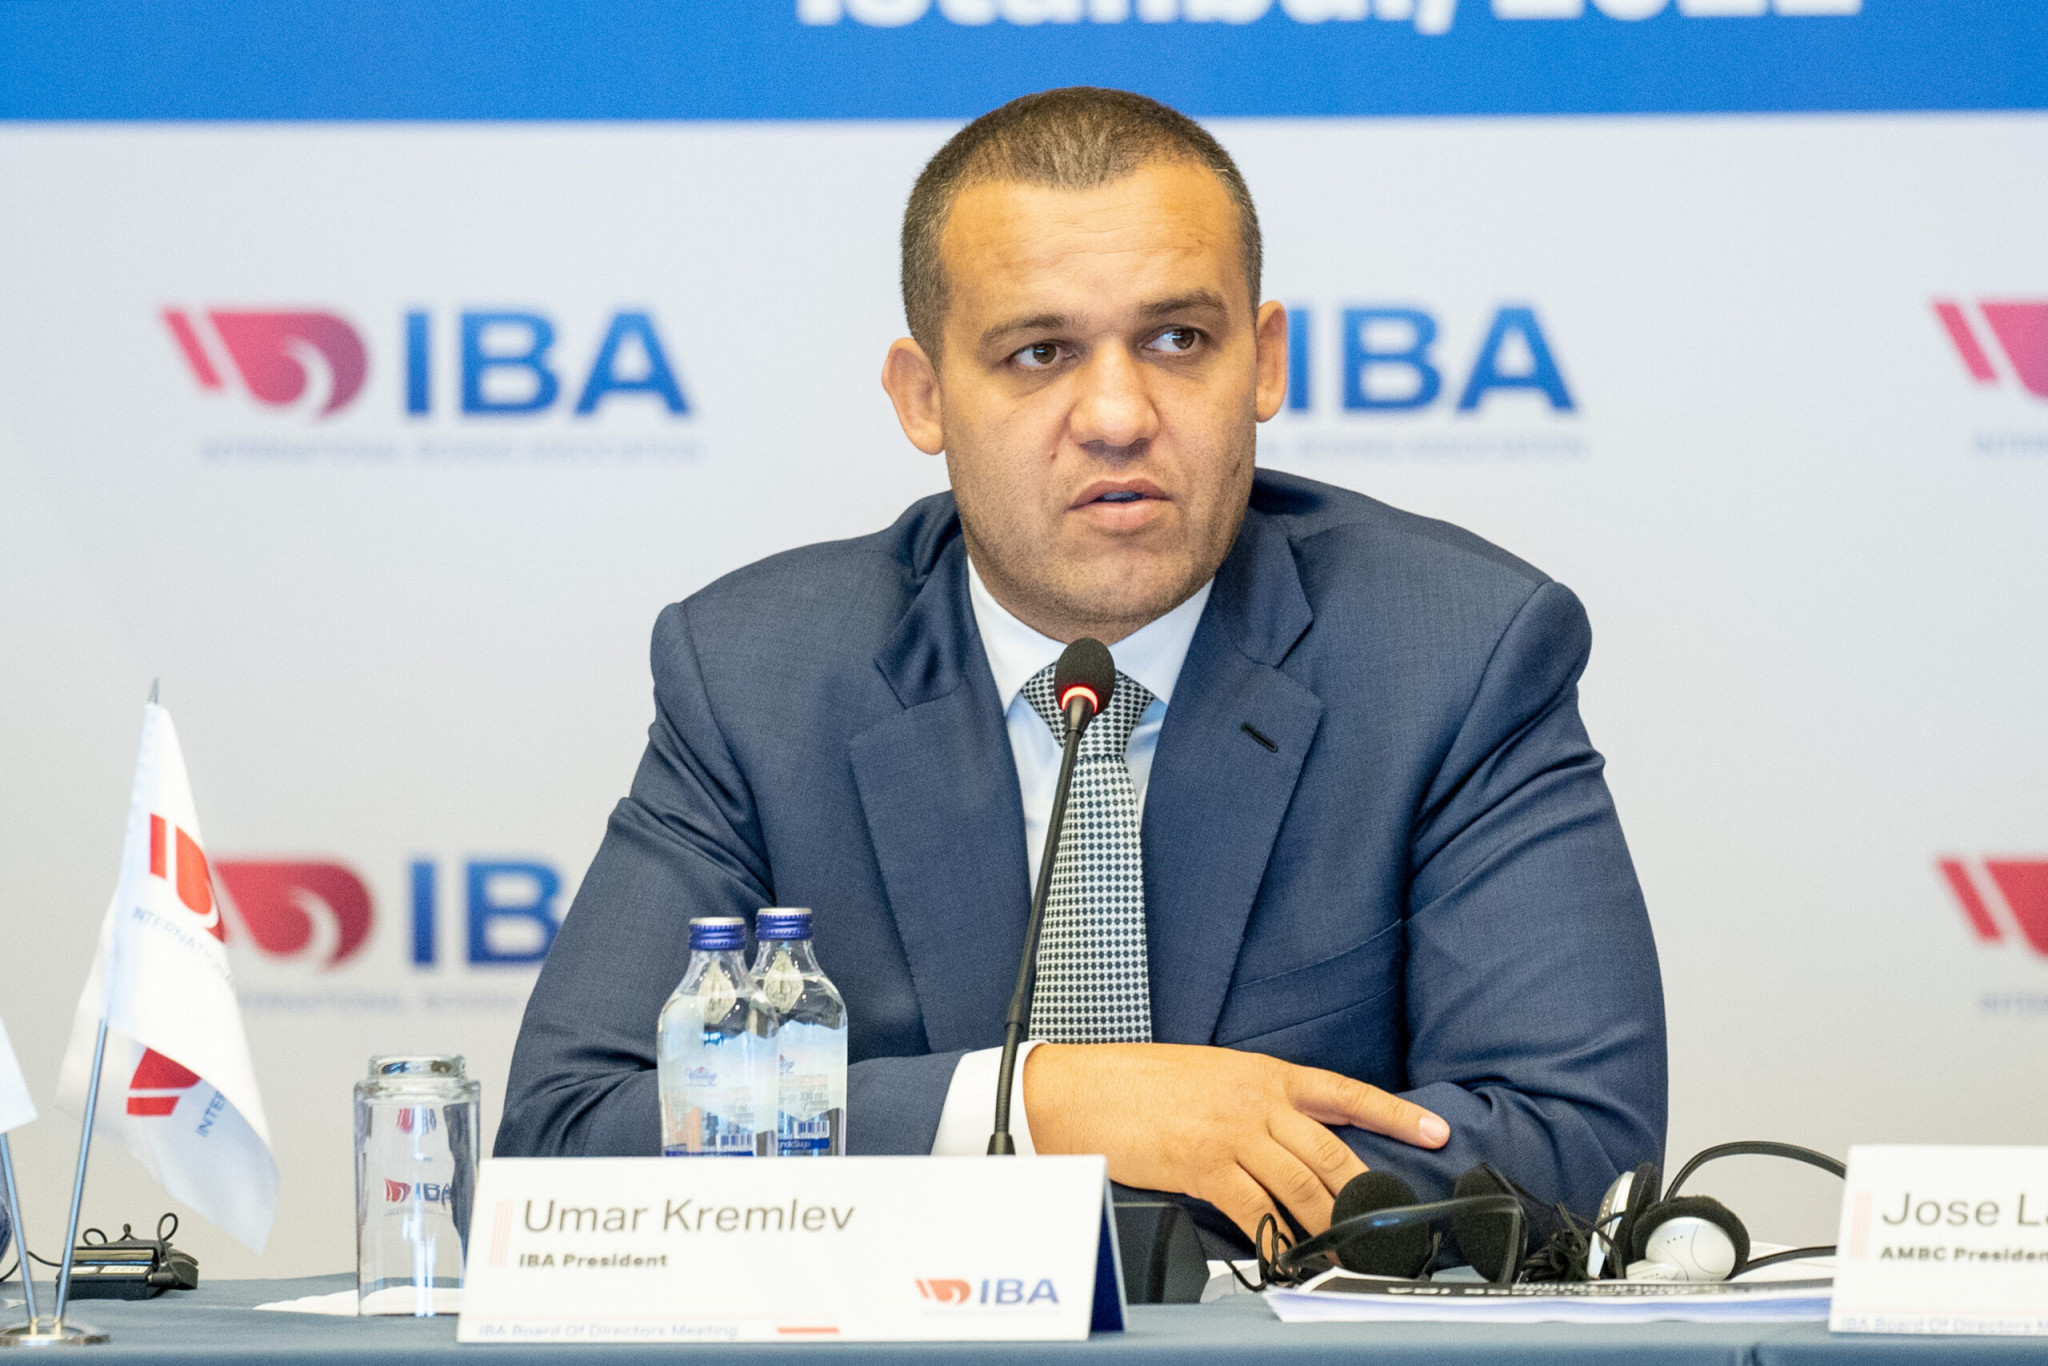 IBA hits back at IOC and stresses commitment to governance reforms